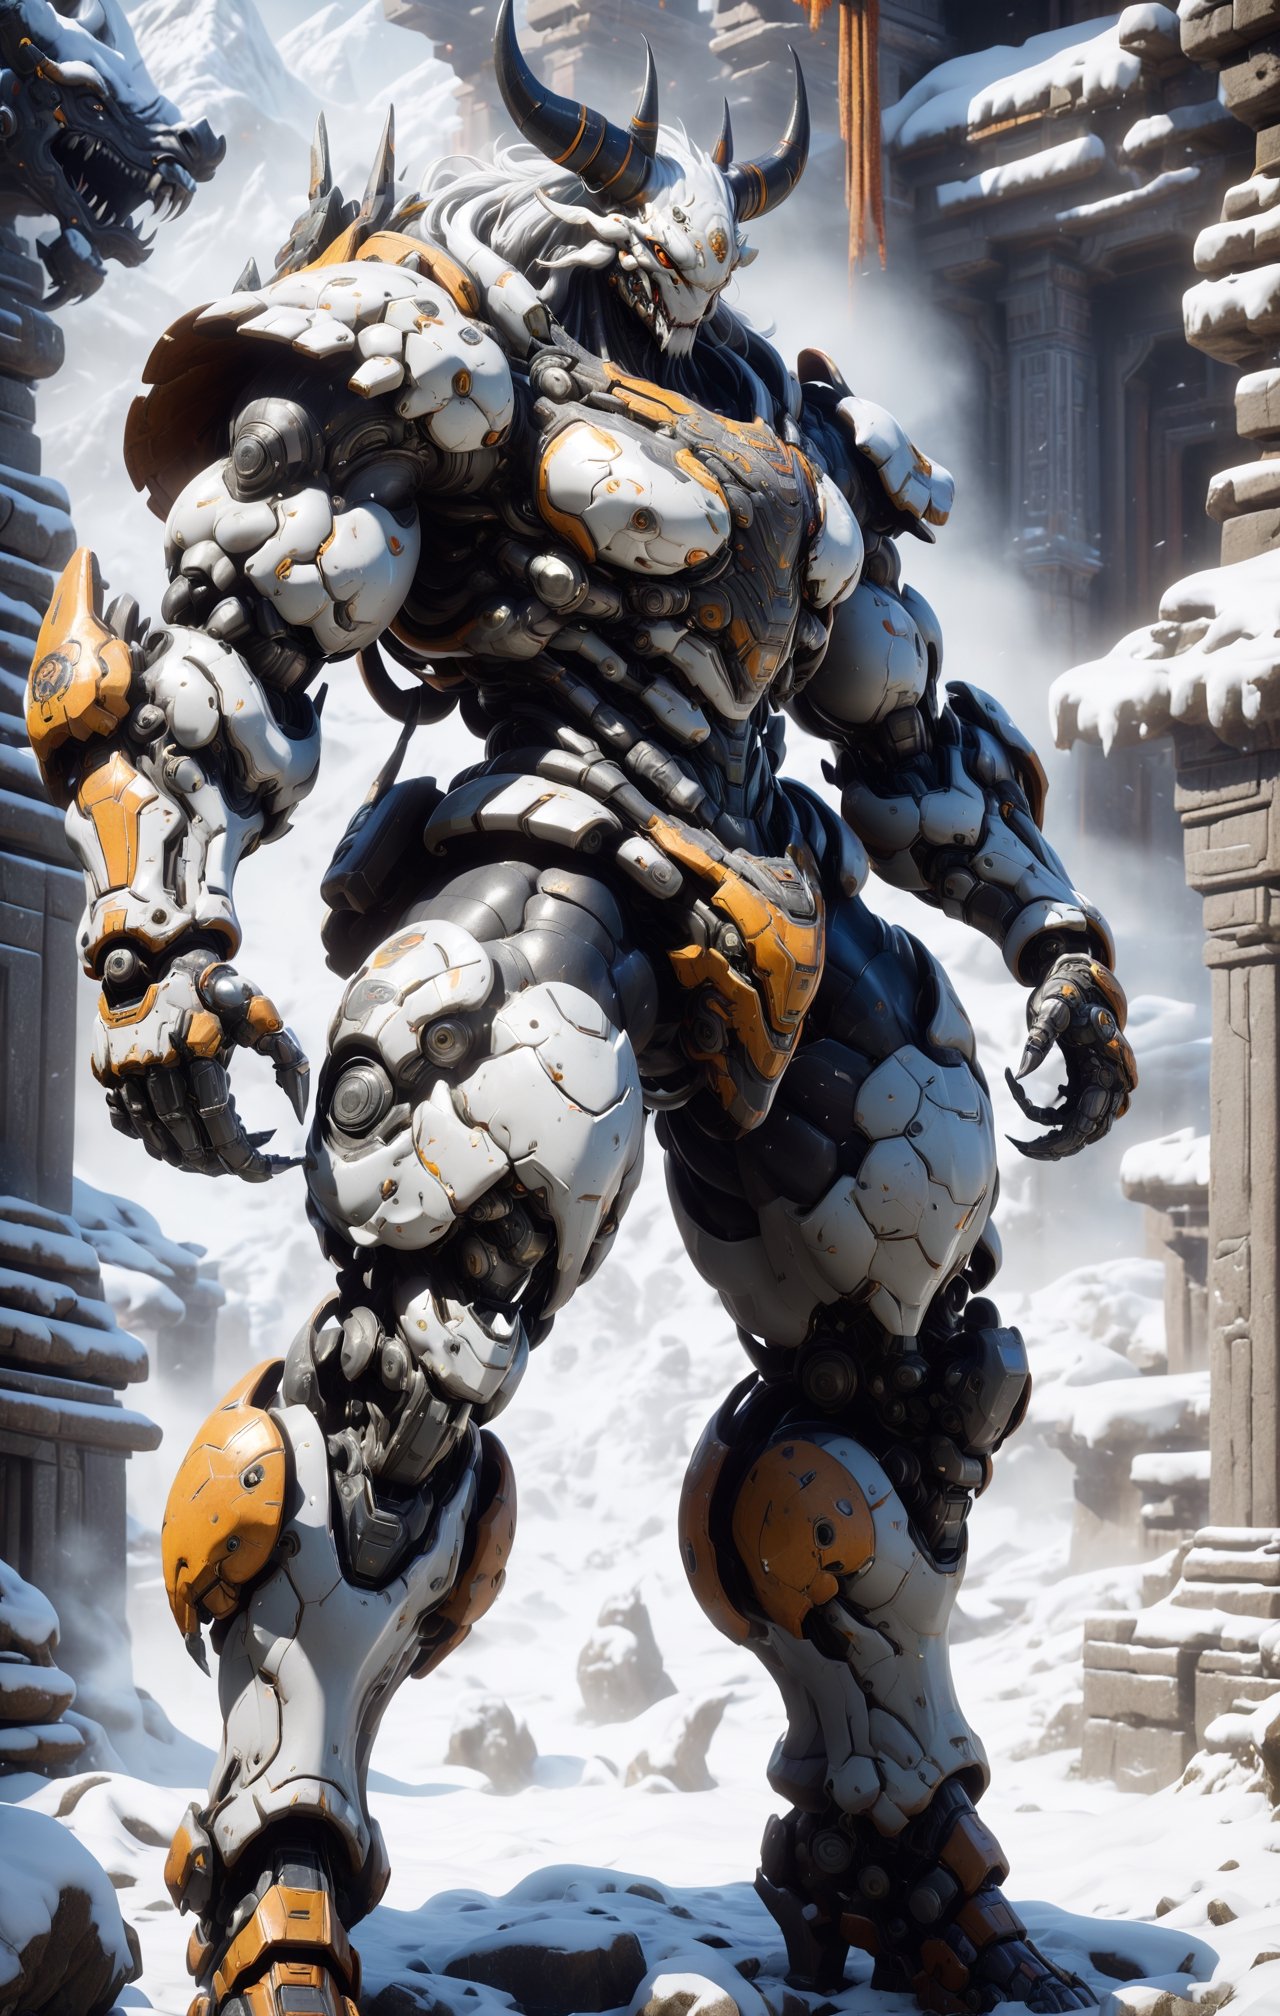 A terrifying ultimate beast centaur with rhino half body, cyborg complex armor, in a fierce fighting pose amidst a snowy temple, enveloped in a misty snowstorm. Hyper Detailed, Cinematic Lighting Photography capturing every intricate detail, shot on nvidia rtx for realism, showcasing super-resolution and rendered in Unreal 5. Enhanced with subsurface scattering and PBR texturing for a lifelike appearance, in stunning 32k UHD resolution.